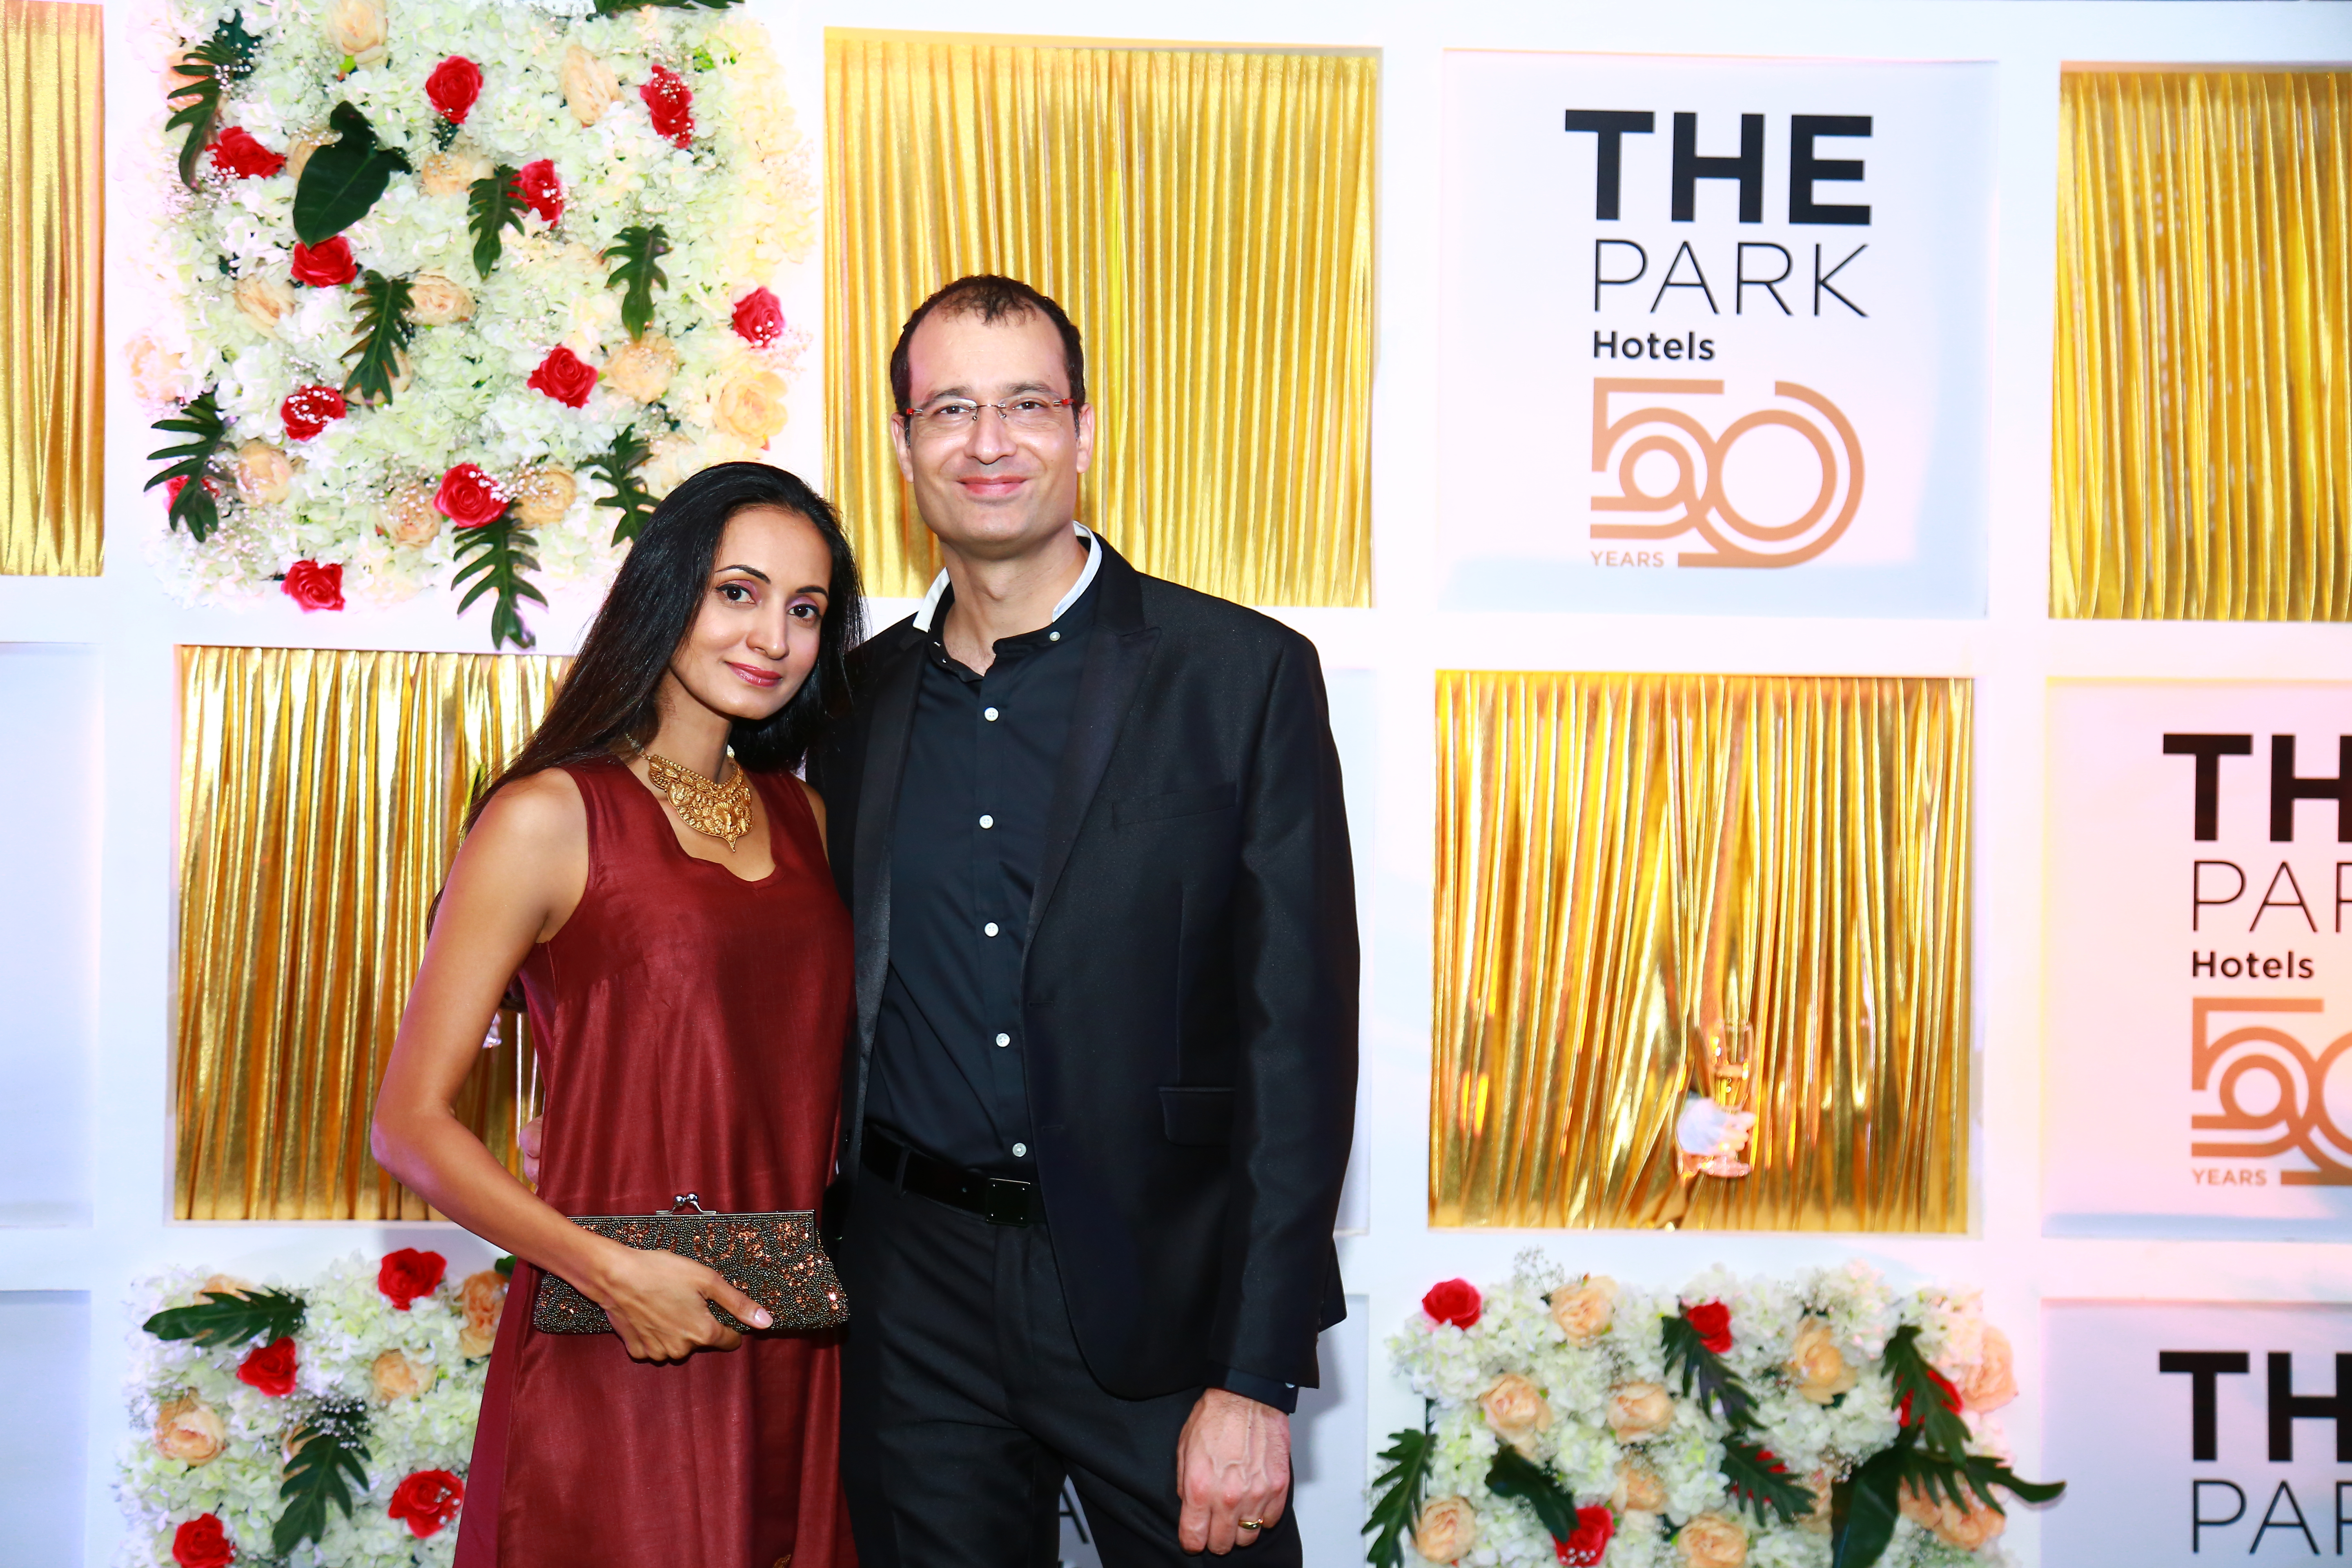 50 Years Of The Park Hotels Celebrations